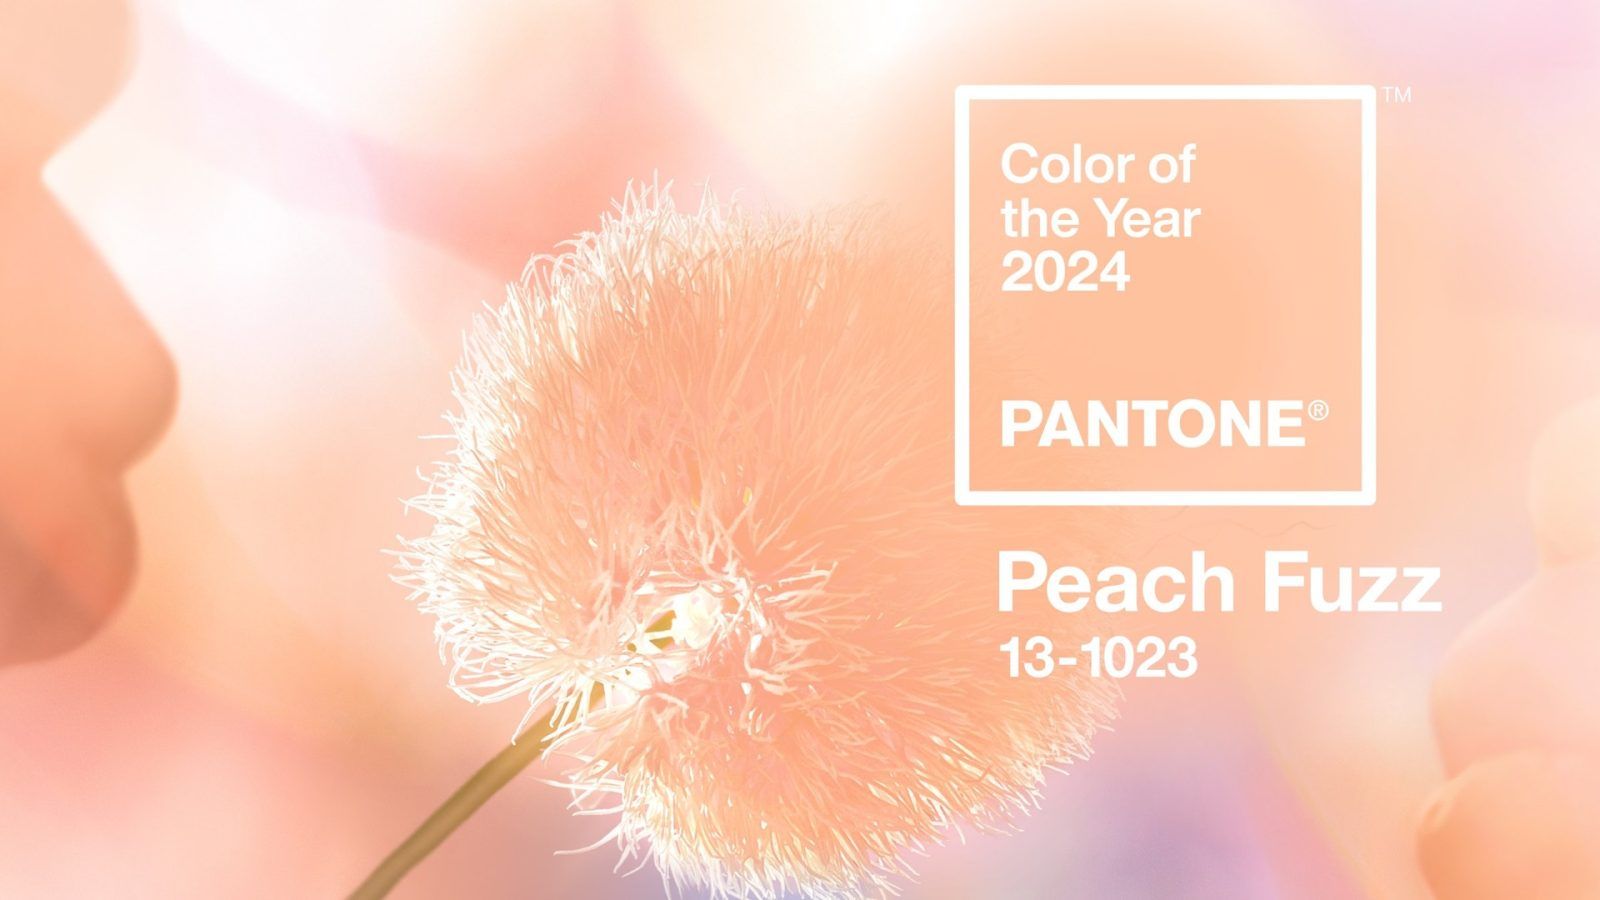 Pantone picks Peach Fuzz as the 2024 Color of the Year